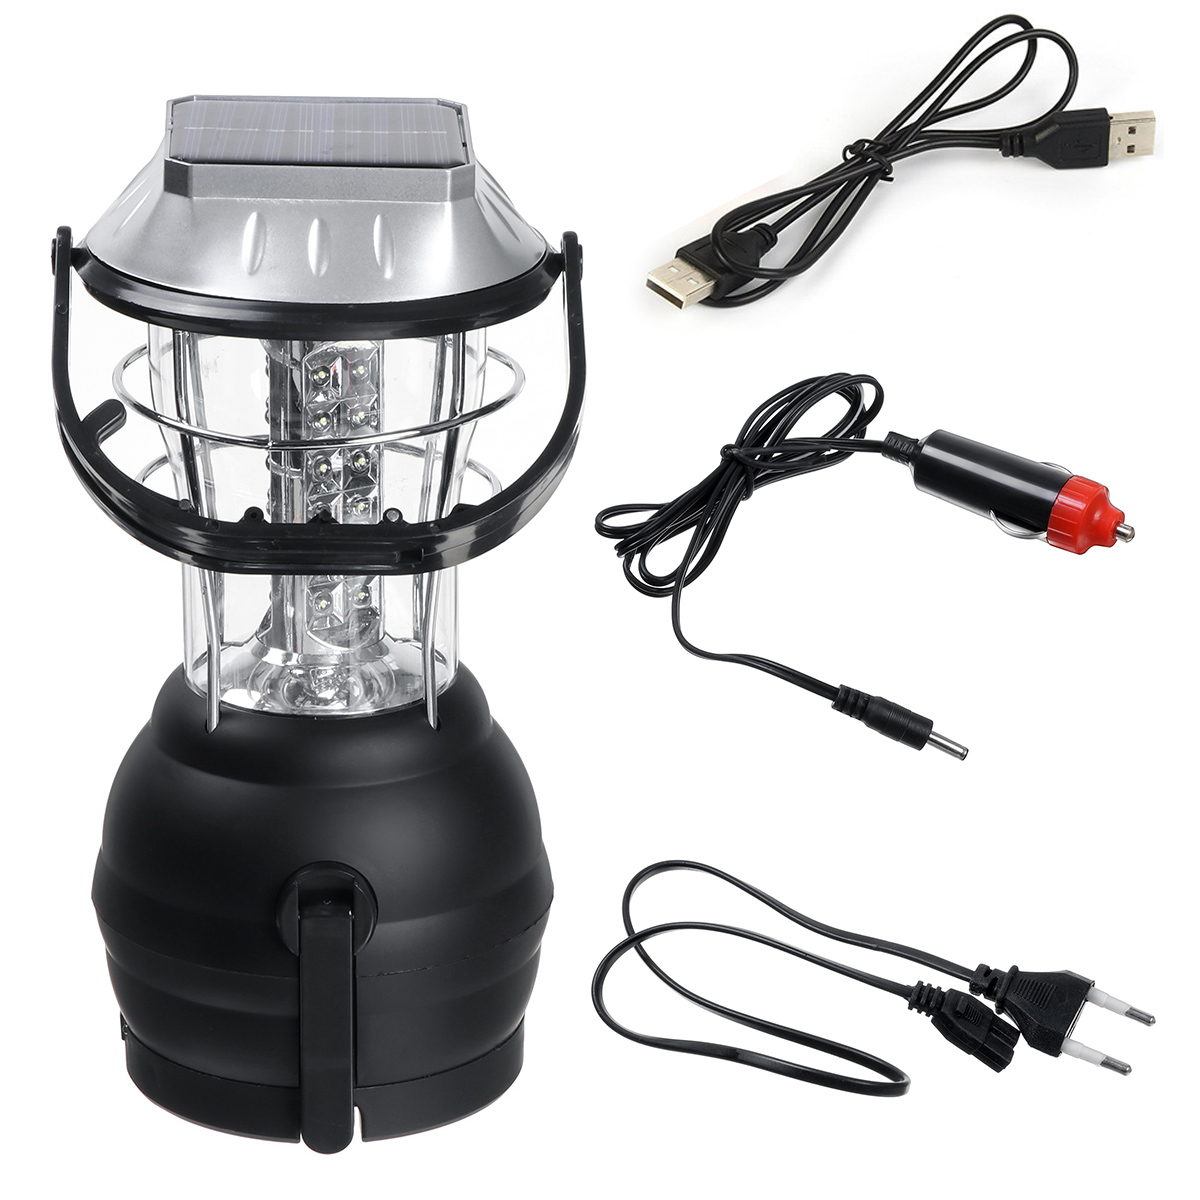 Solar-Emergency-Light-USB-Rechargeable-36LED-Outdoor-Lamp-for-Camping-Hiking-Fishing-1759532-3